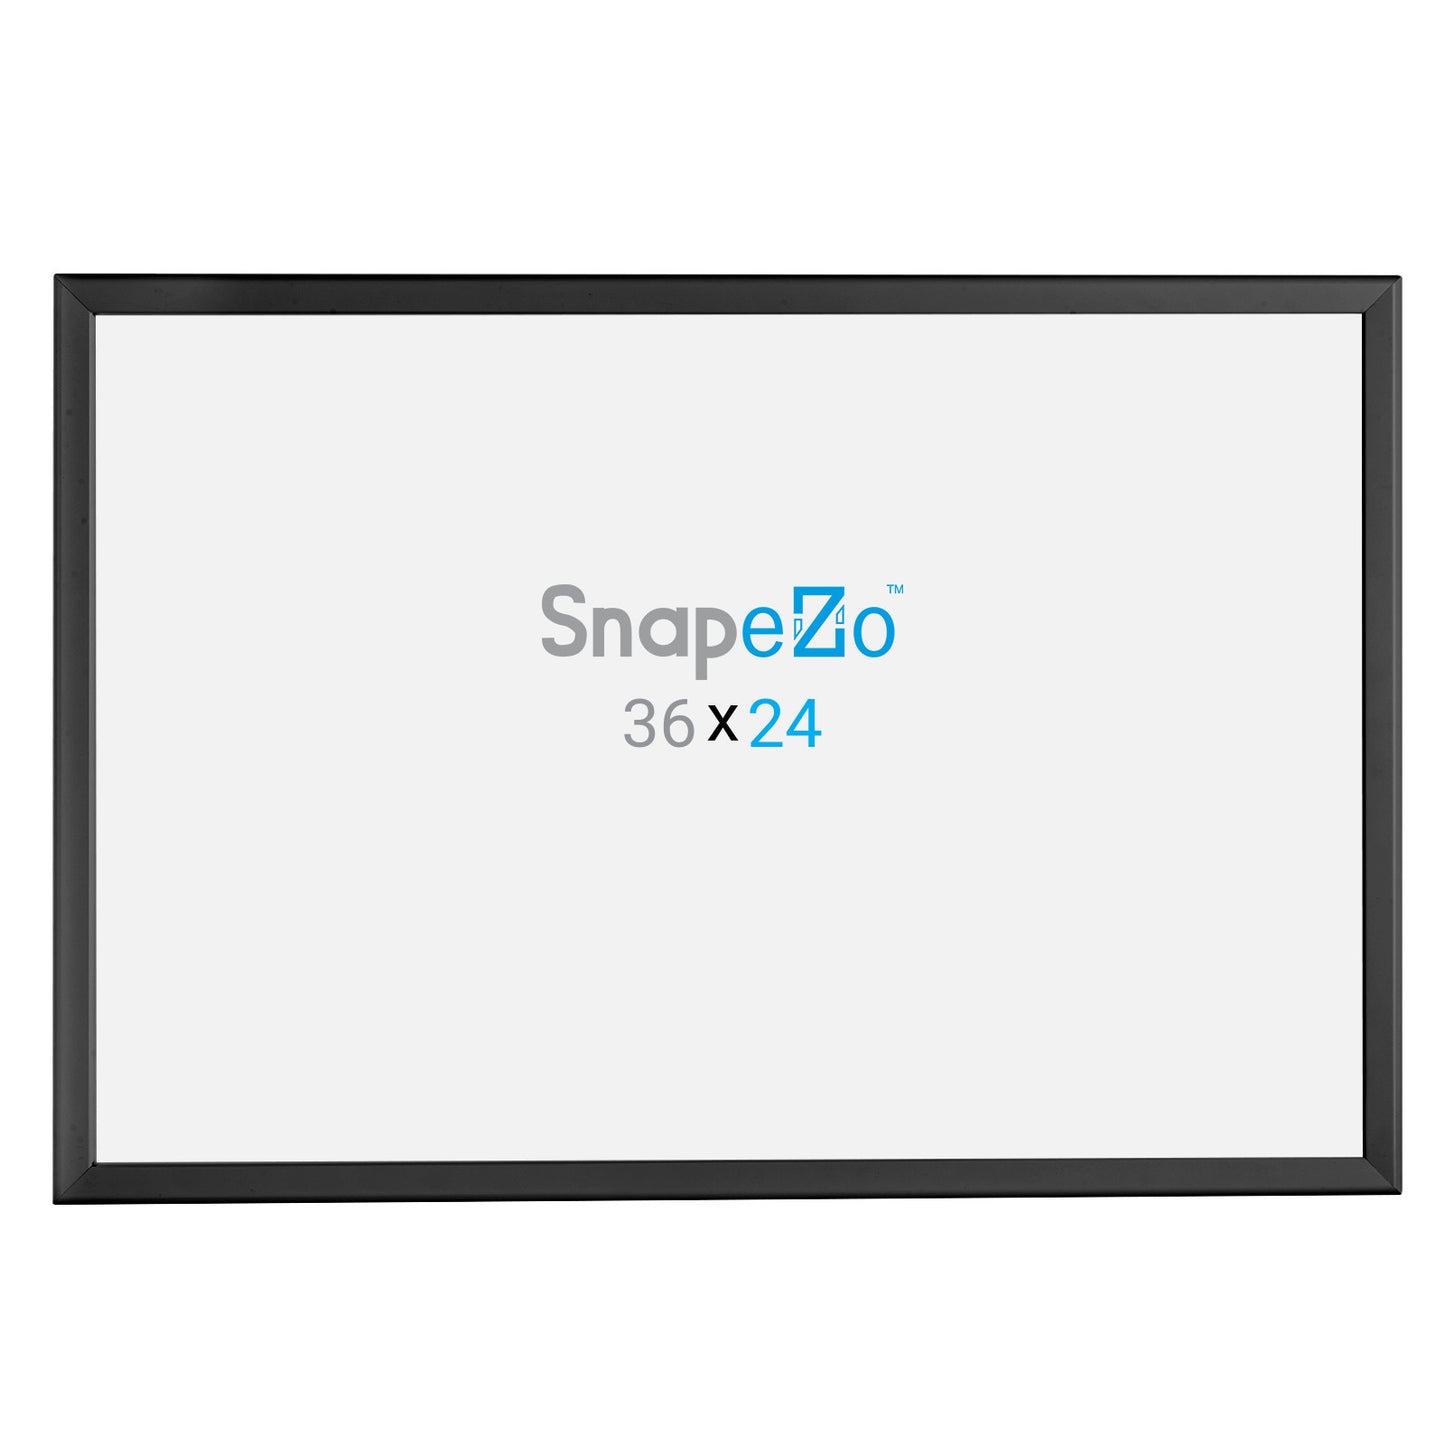 5 Case Pack of Snapezo® of Black 24x36 Movie Poster Frame - 1.25" Profile